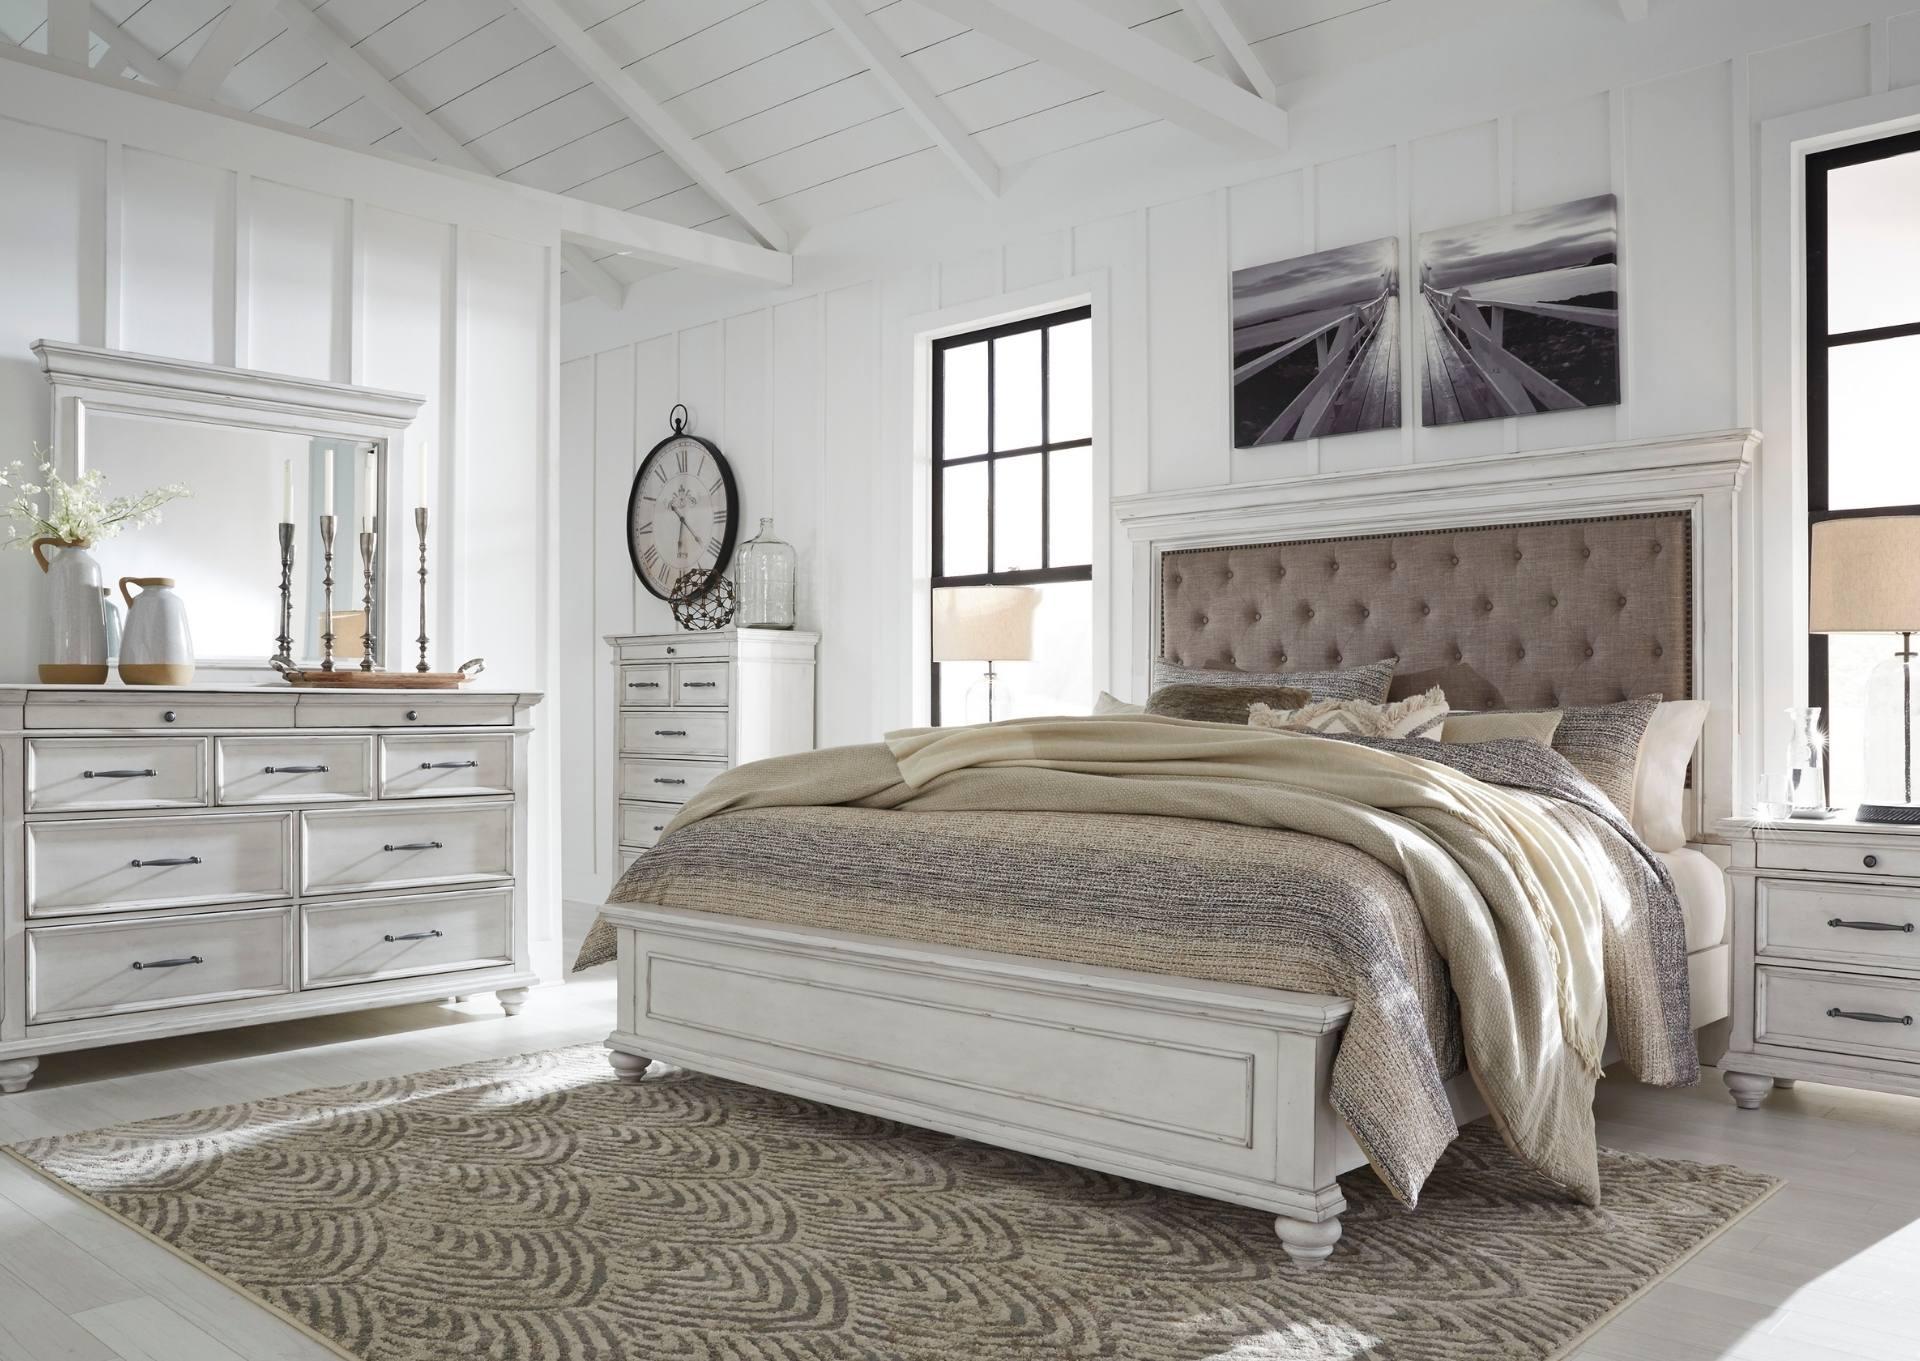 KANWYN QUEEN UPHOLSTERED PANEL BED,ASHLEY FURNITURE INC.